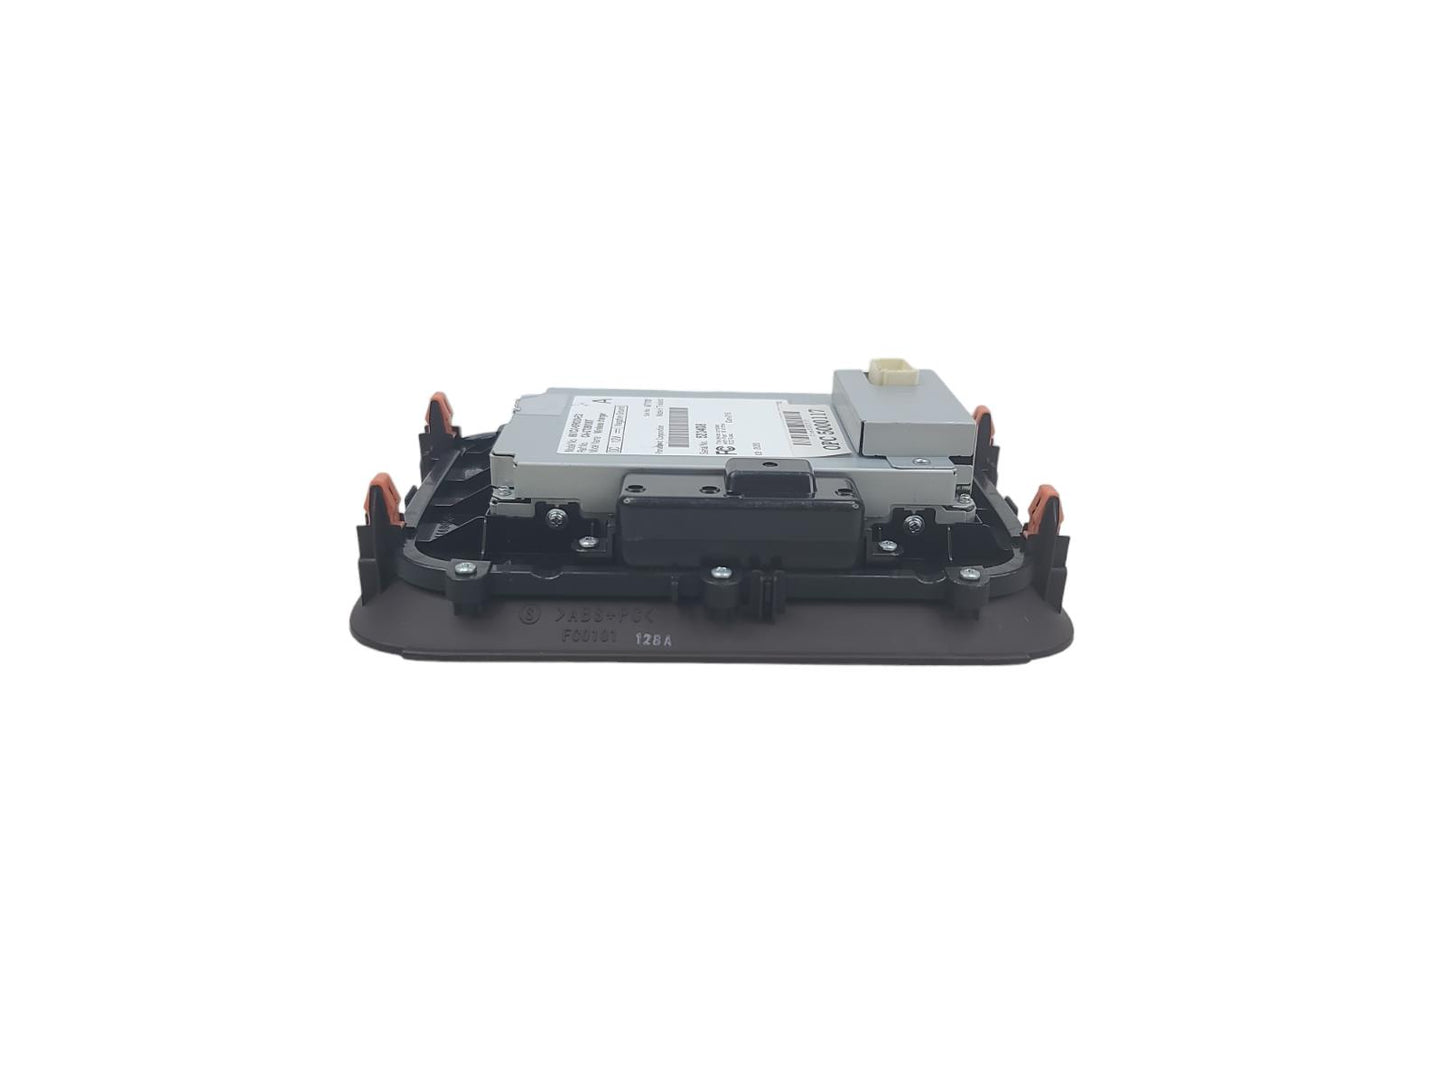 2019-2021 Toyota RAV4 CRADLE ASSEMBLY, MOBILE WIRELESS CHARGER 861C0-0R020-E2